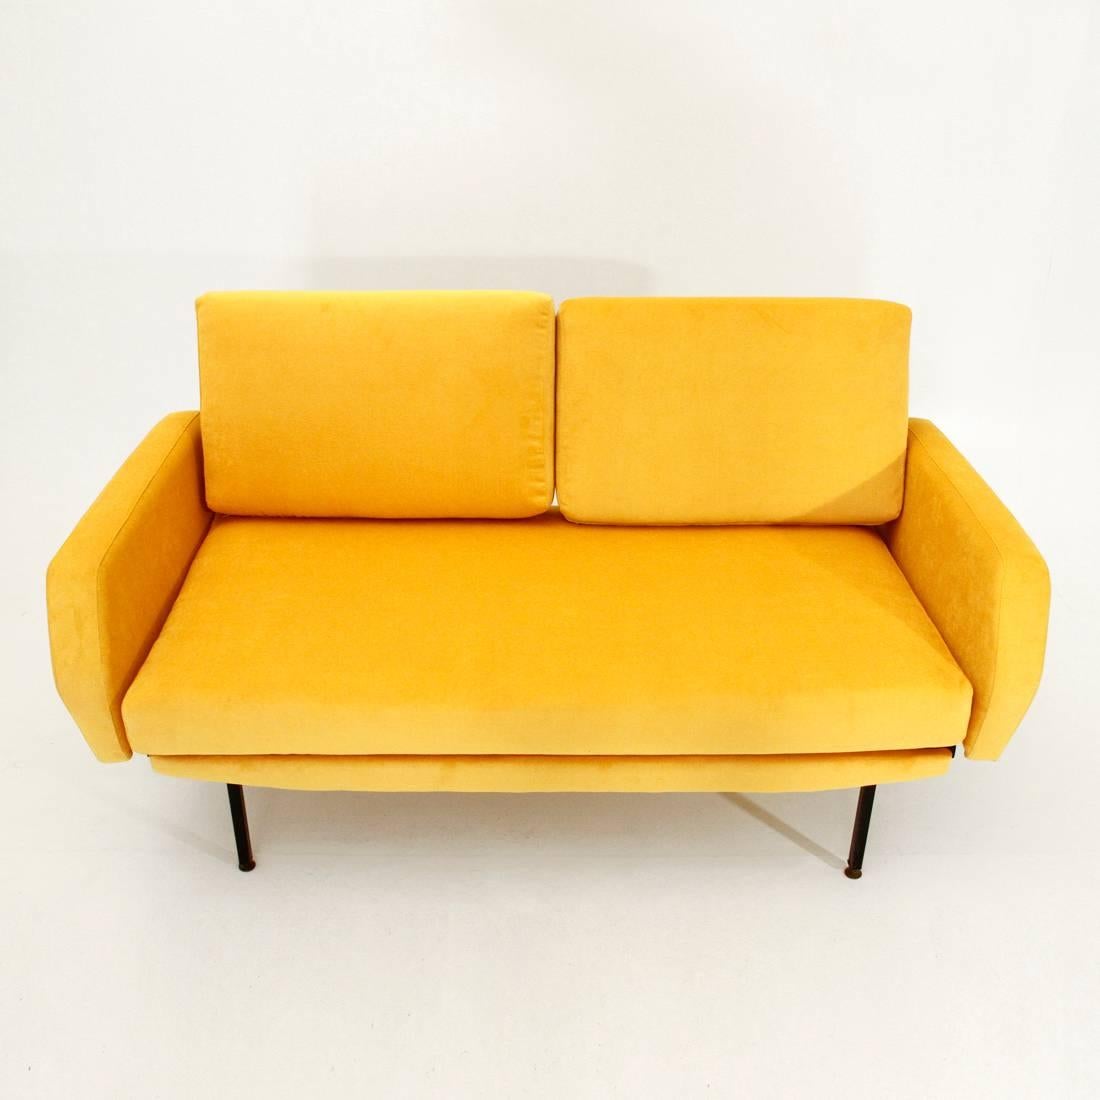 Sofa from the 1950s of Italian production.
Black painted metal frame with adjustable brass foot.
Cushions lined with new yellow velvet fabric.
The two armrests are lowered by making the couch a bed.
Good general conditions, some signs on the